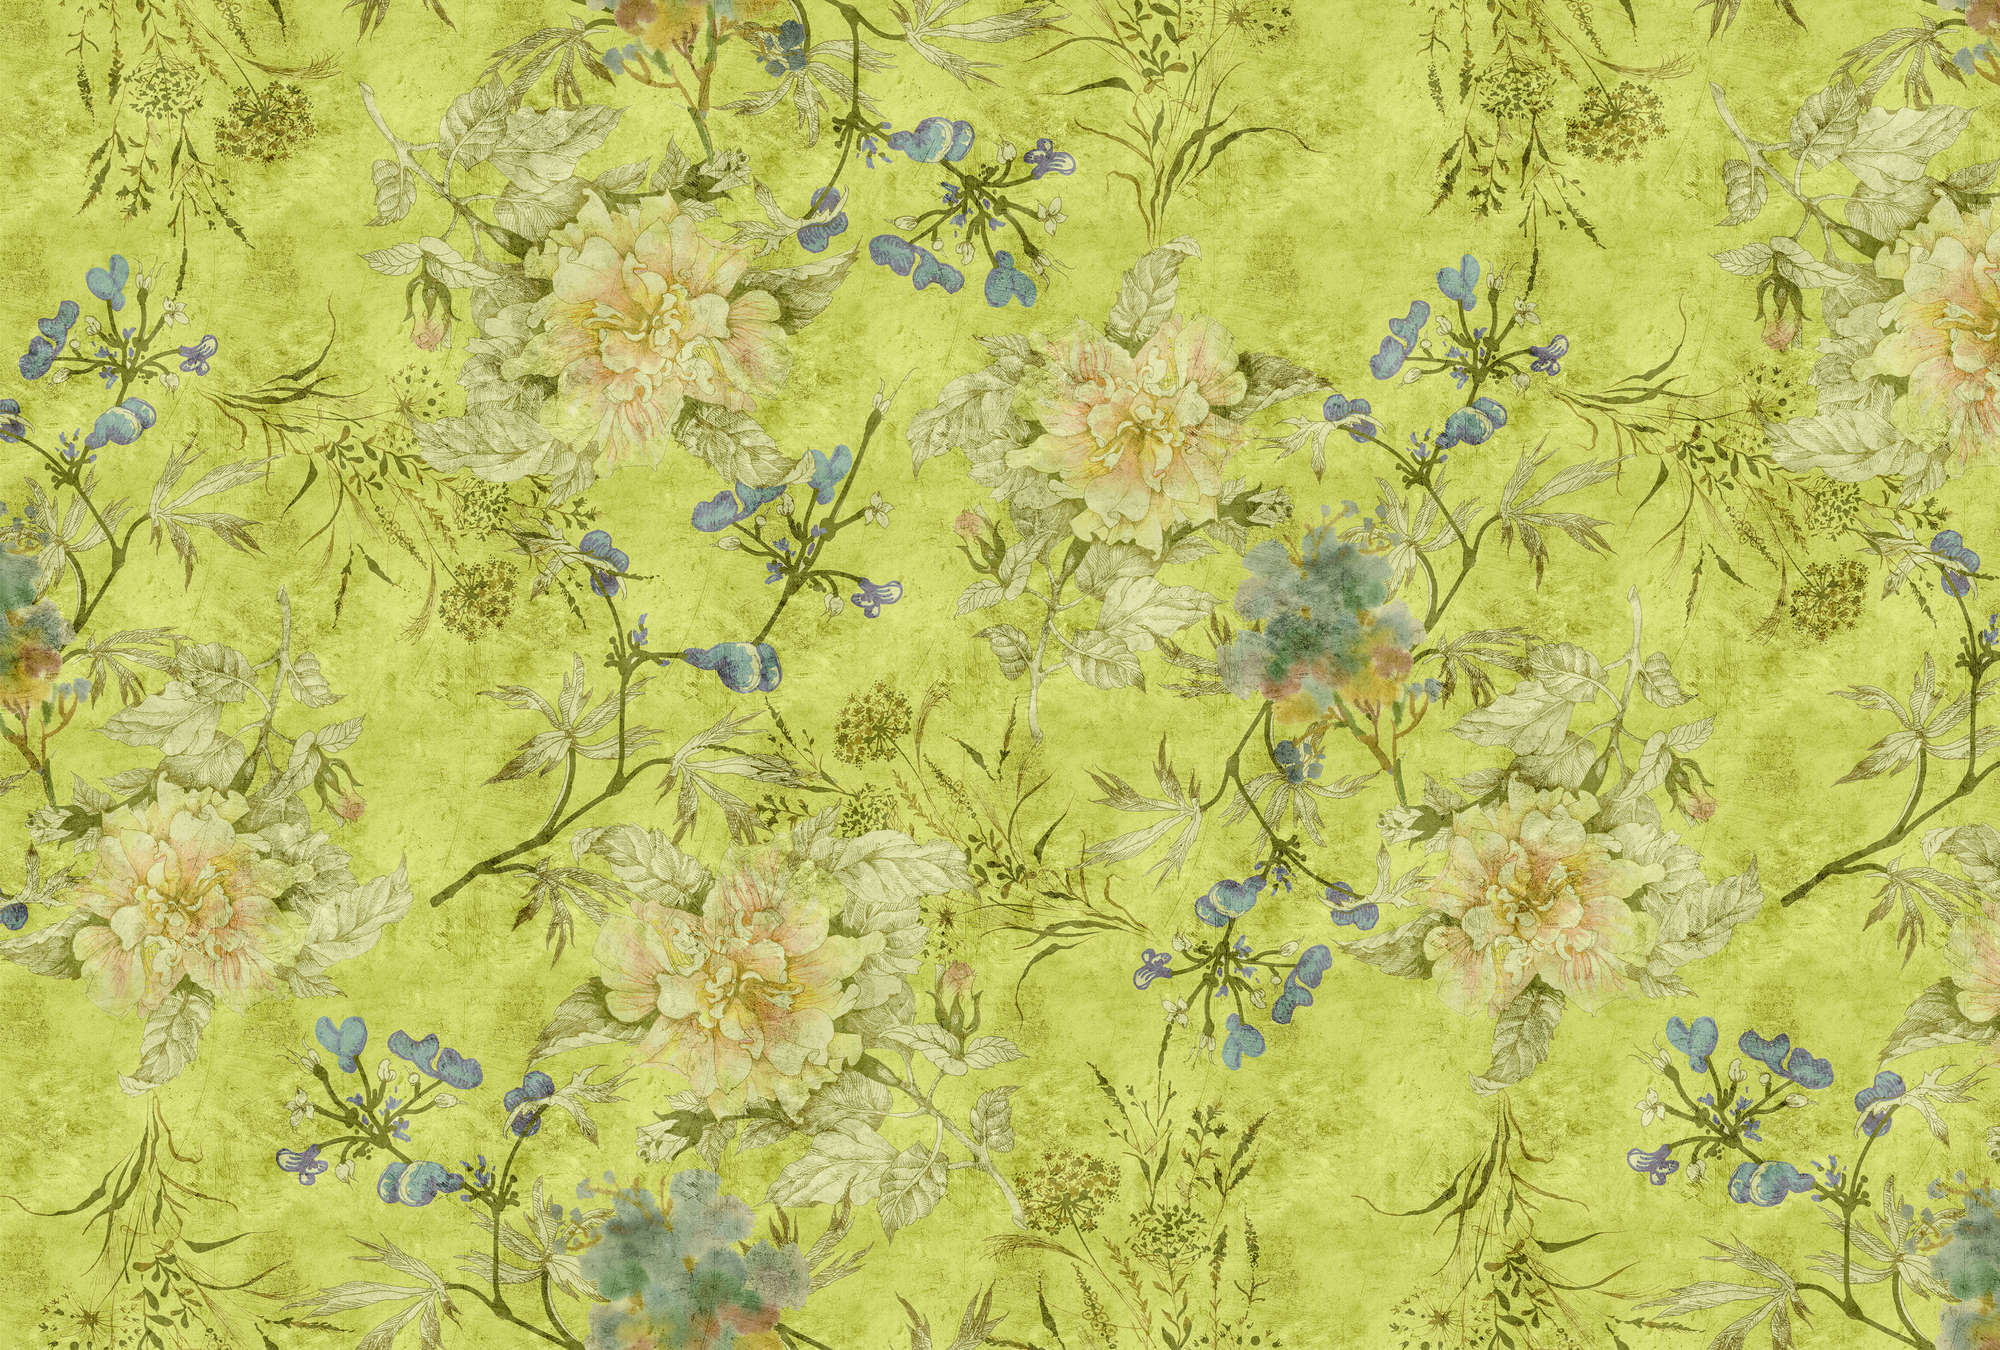             Tenderblossom 1 - Photo wallpaper with modern flower tendrils in a scratchy structure - Green | Matt smooth non-woven
        